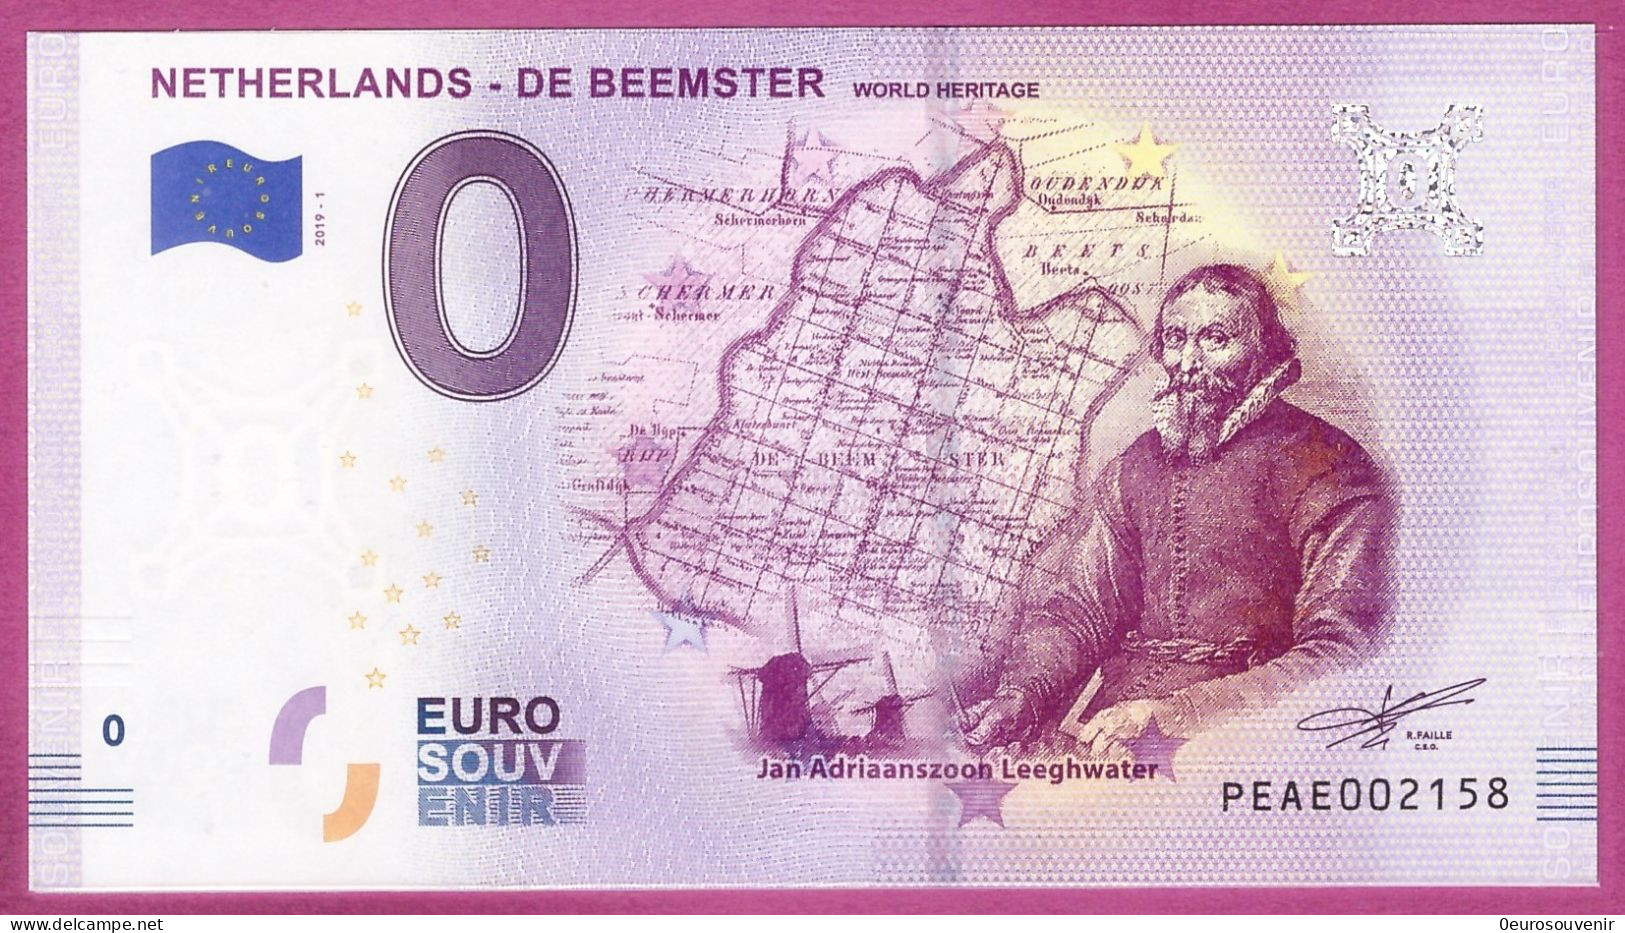 0-Euro PEAE 2019-1 NETHERLANDS - DE BEEMSTER - WORLD HERITAGE - Private Proofs / Unofficial